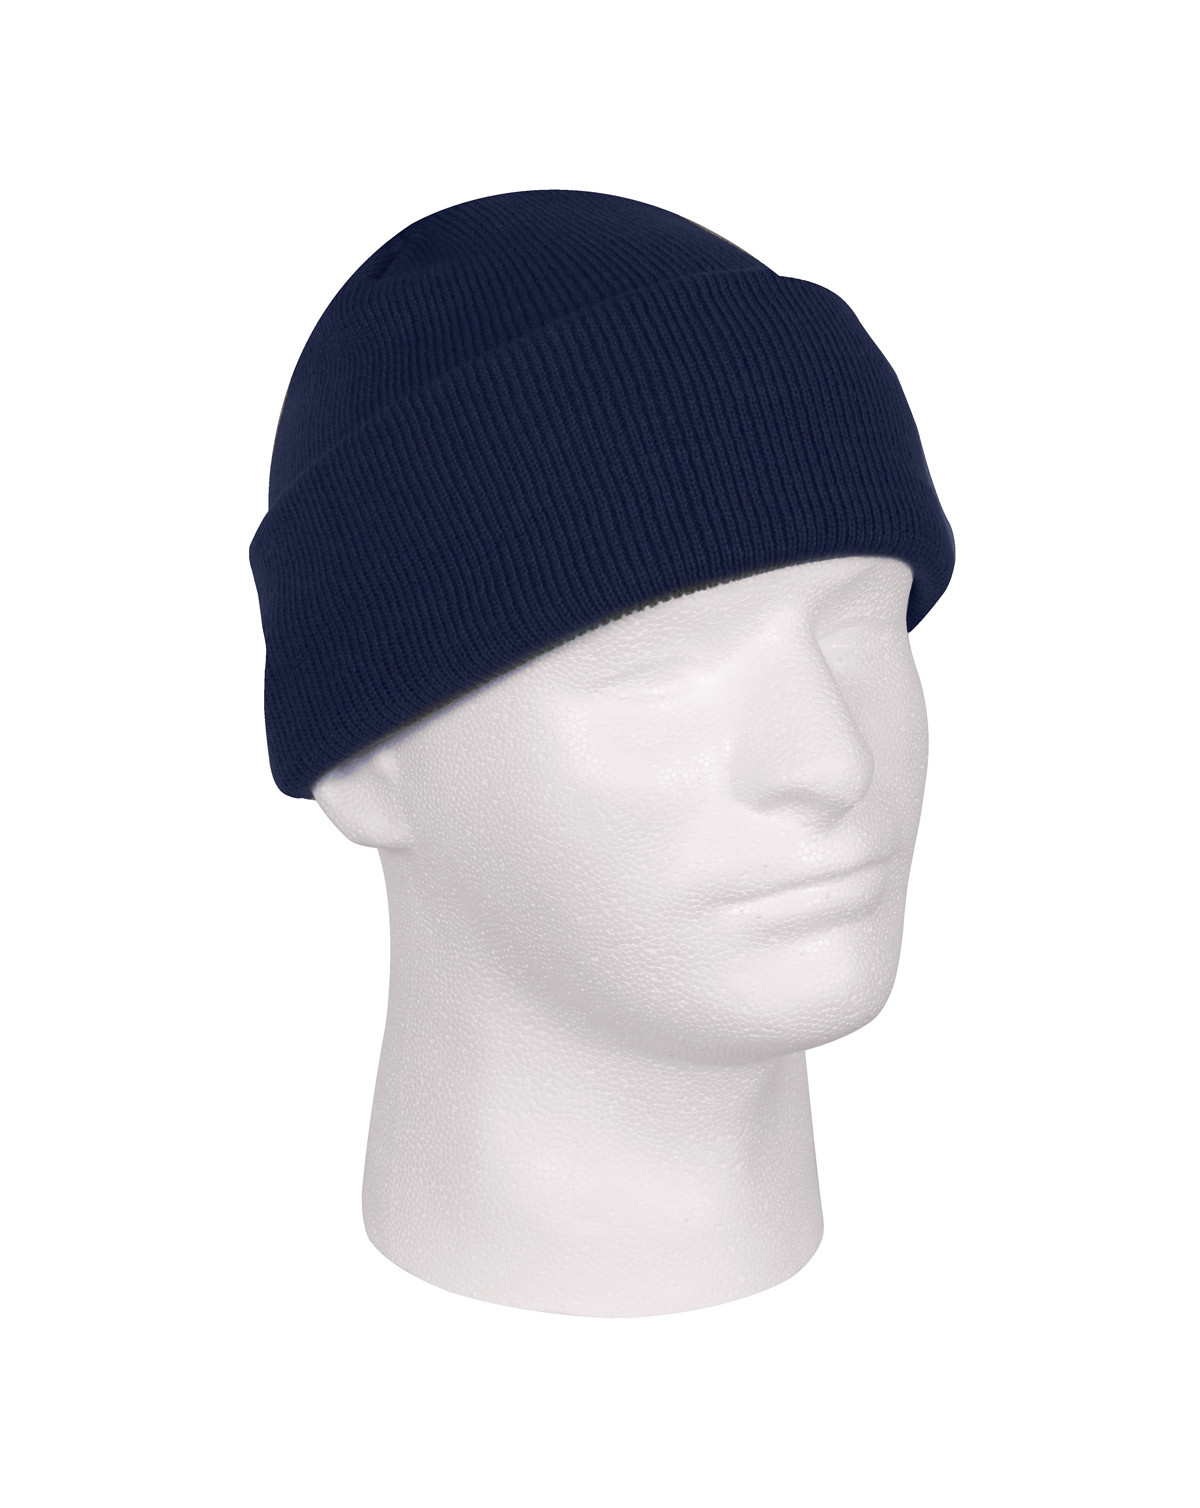 Rothco Deluxe Strikket Watch Cap (Navy, One Size)